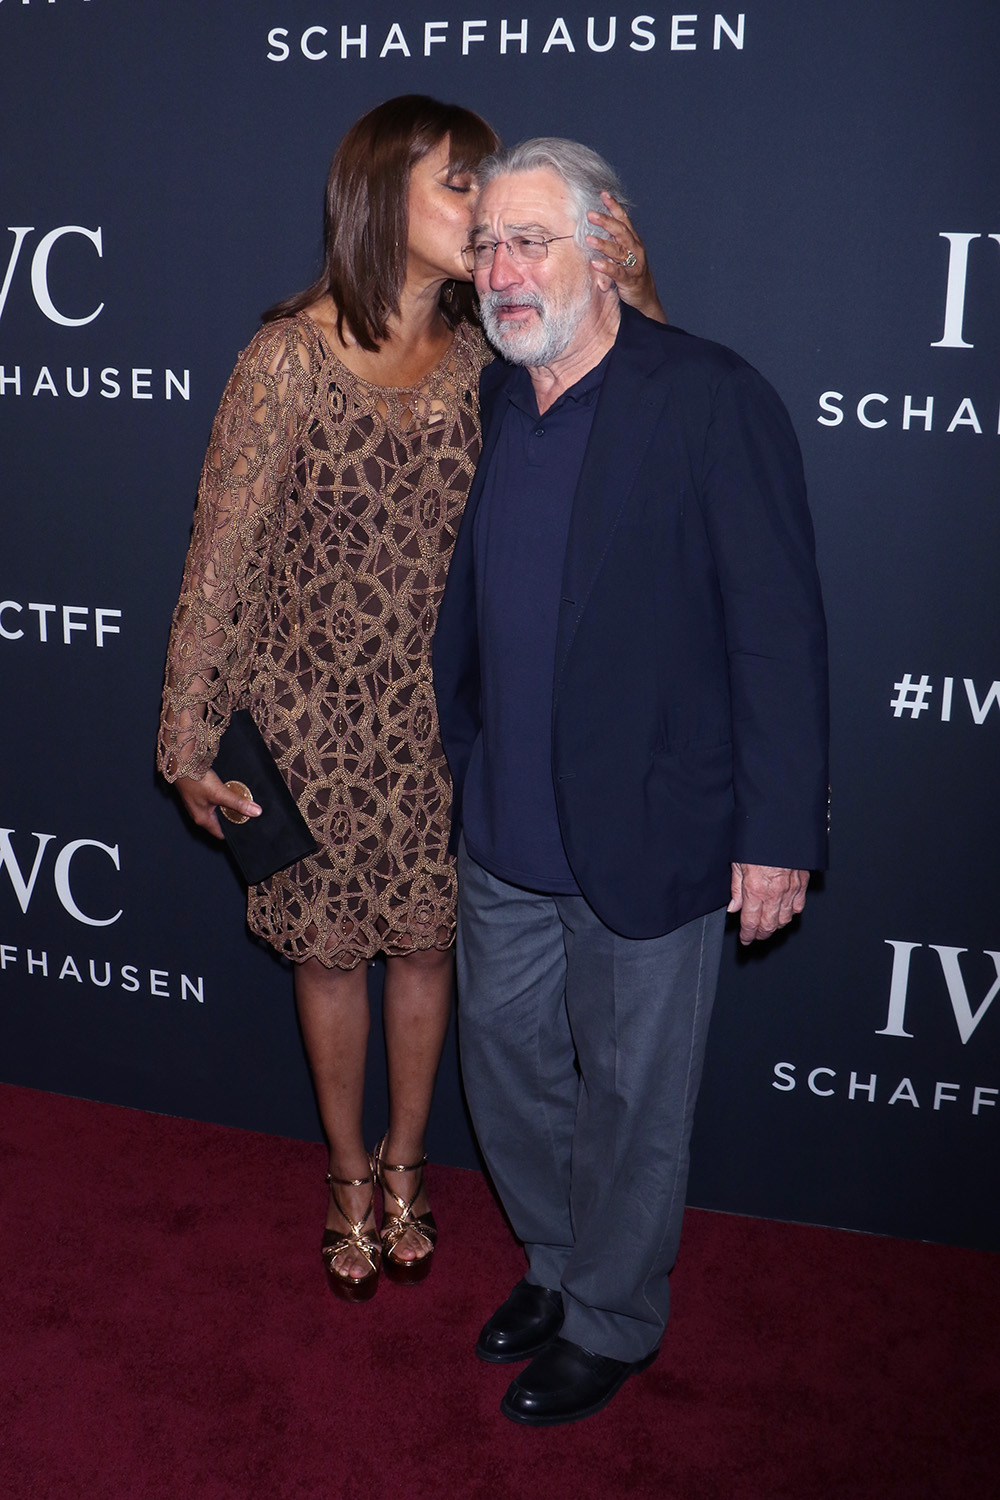 <p>Grace Hightower kissed her husband Robert De Niro’s head while walking the red carpet at an event. The actress sported a cutout brown dress for the evening.</p>